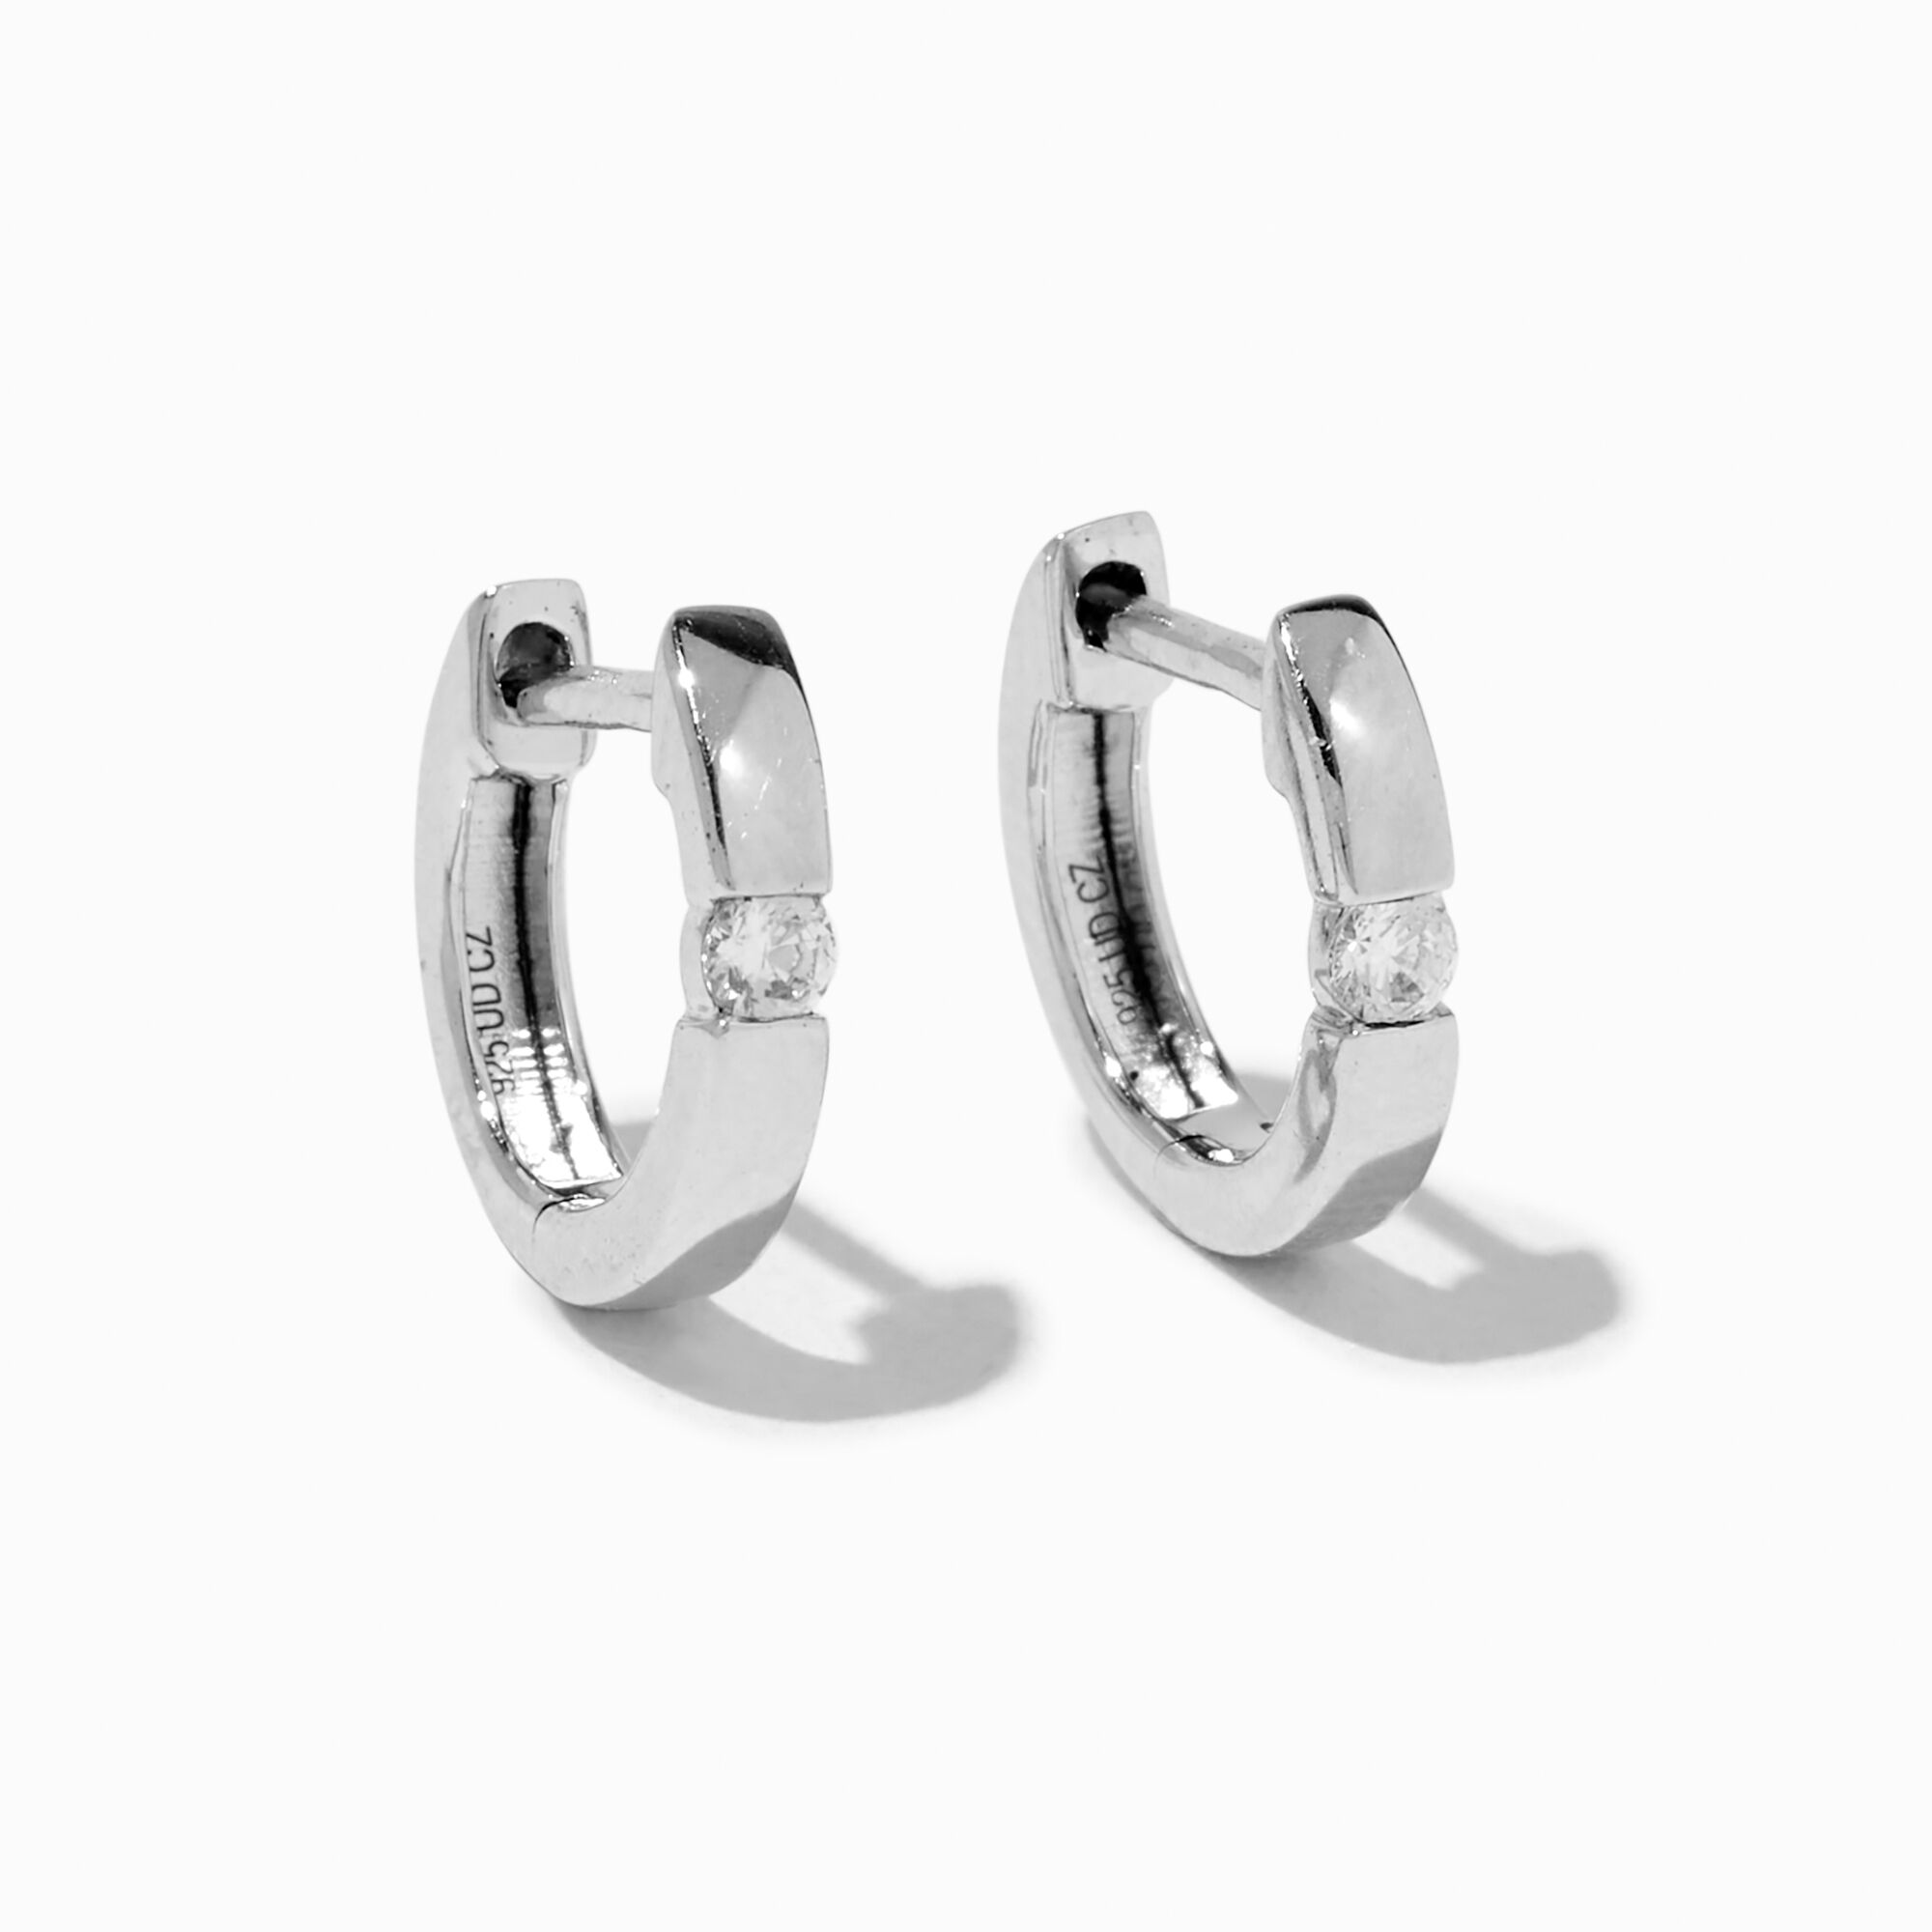 View C Luxe By Claires 120 Ct Tw Lab Grown Diamond 10MM Clicker Hoop Earrings Silver information